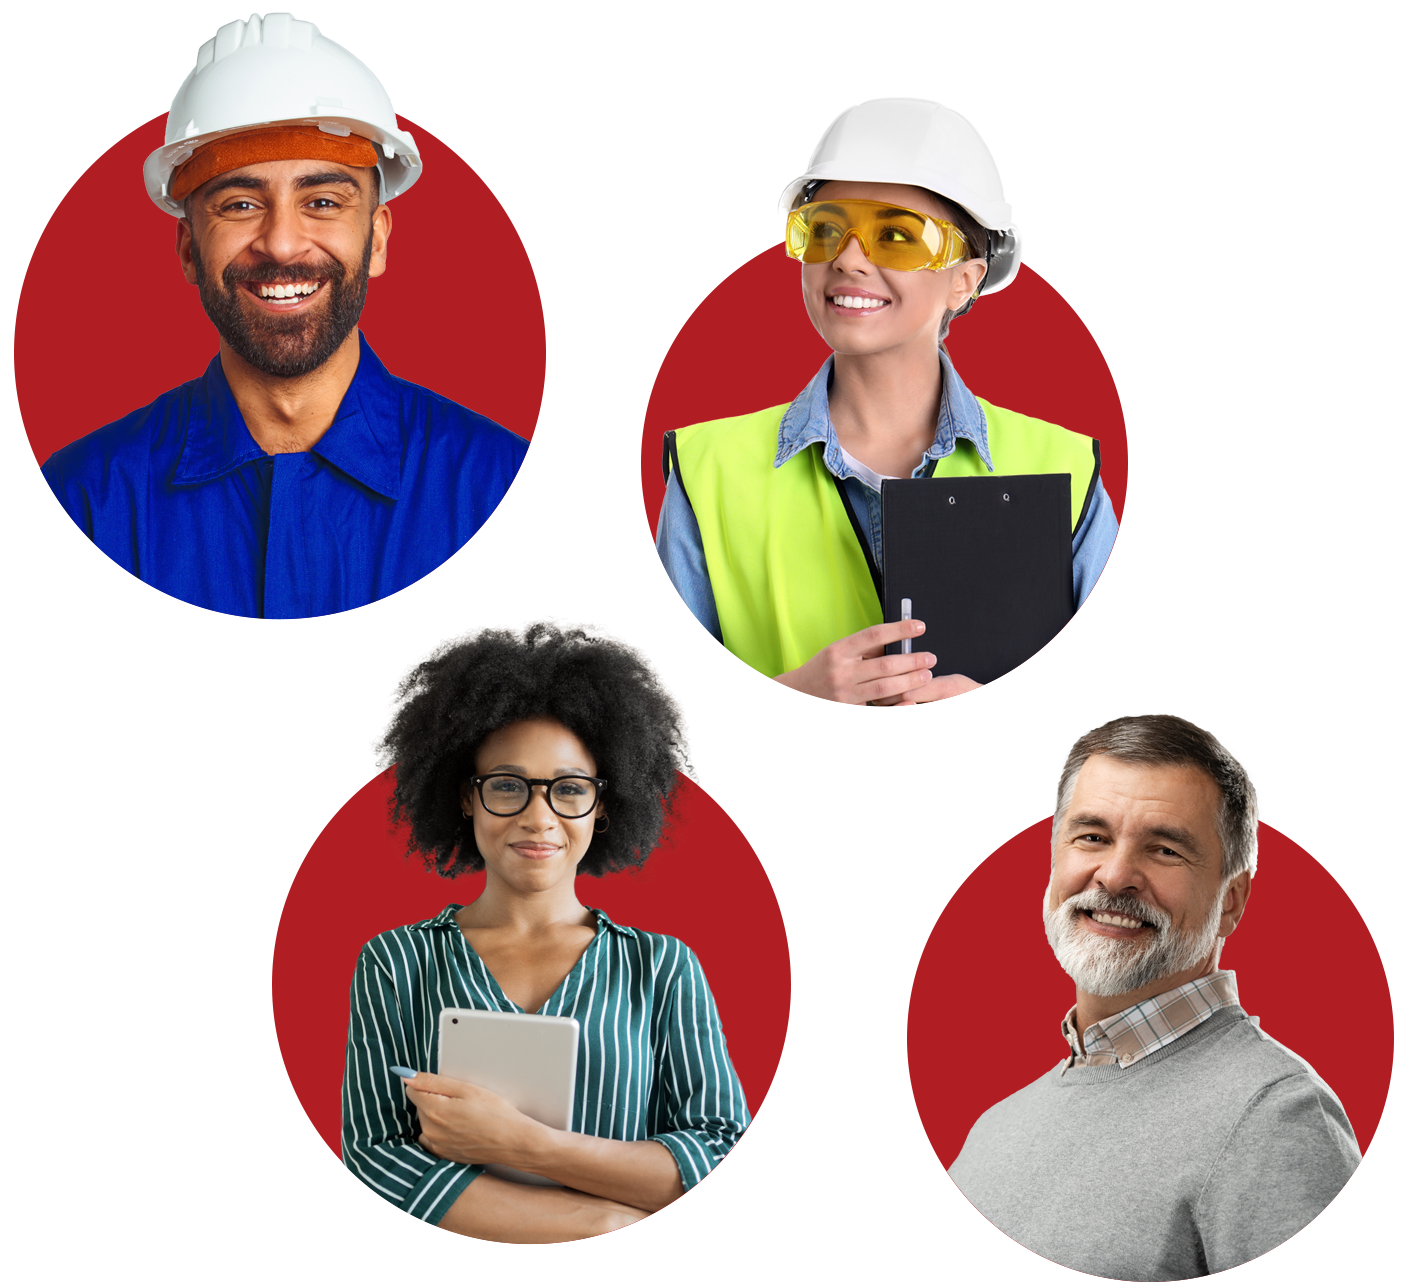 Male with hard hat, female with hard hat, vest, and clipboard, female with tablet, older male with grey sweater and beard.